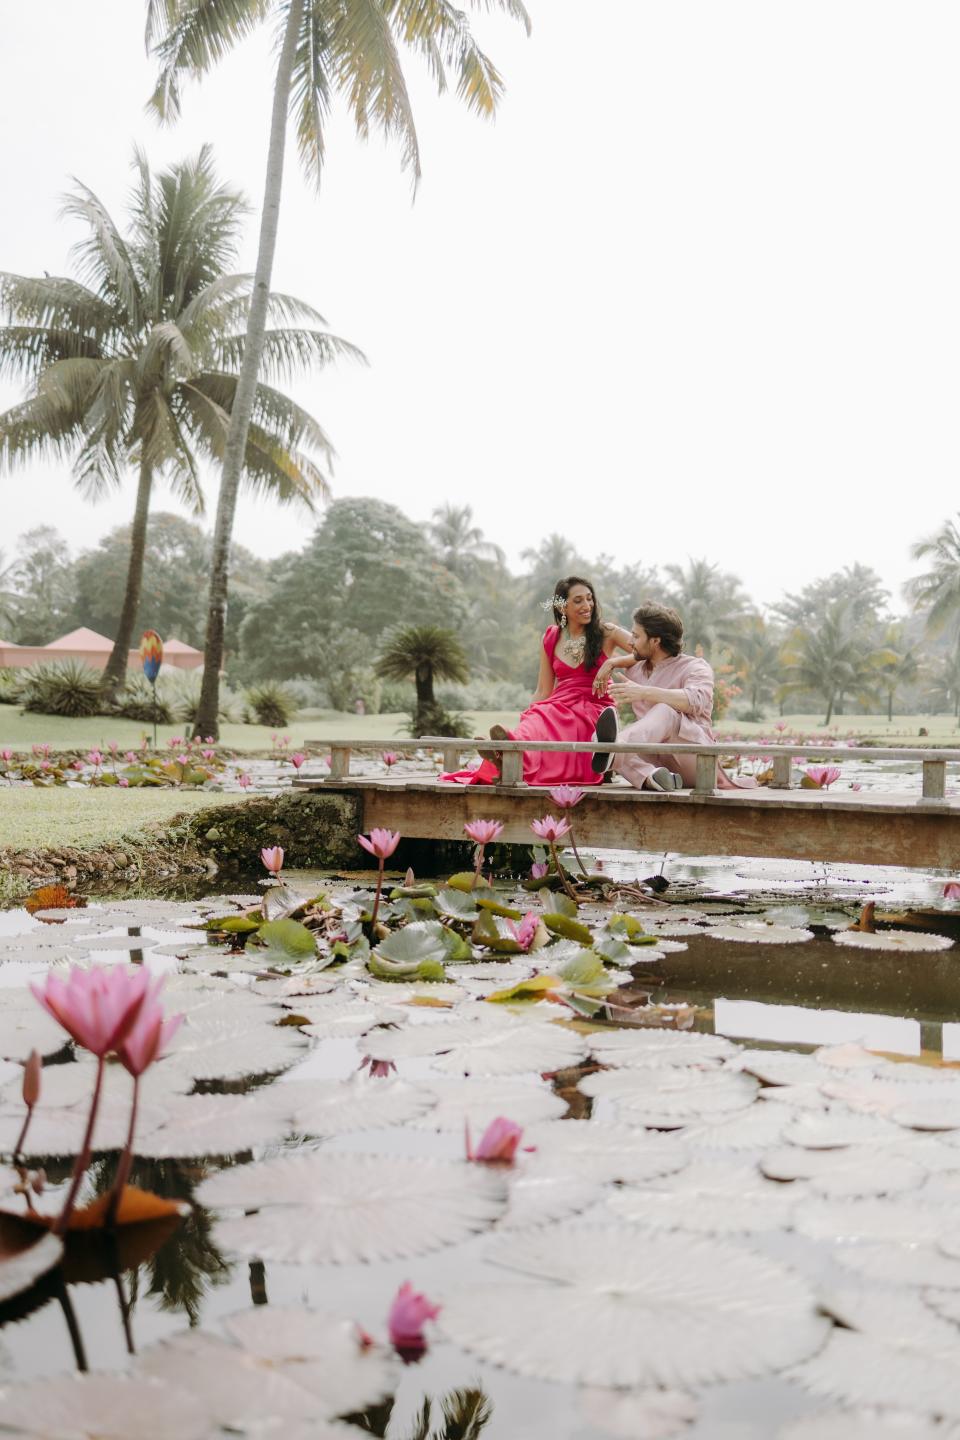 The bride took floral inspiration from the lotuses found around the property